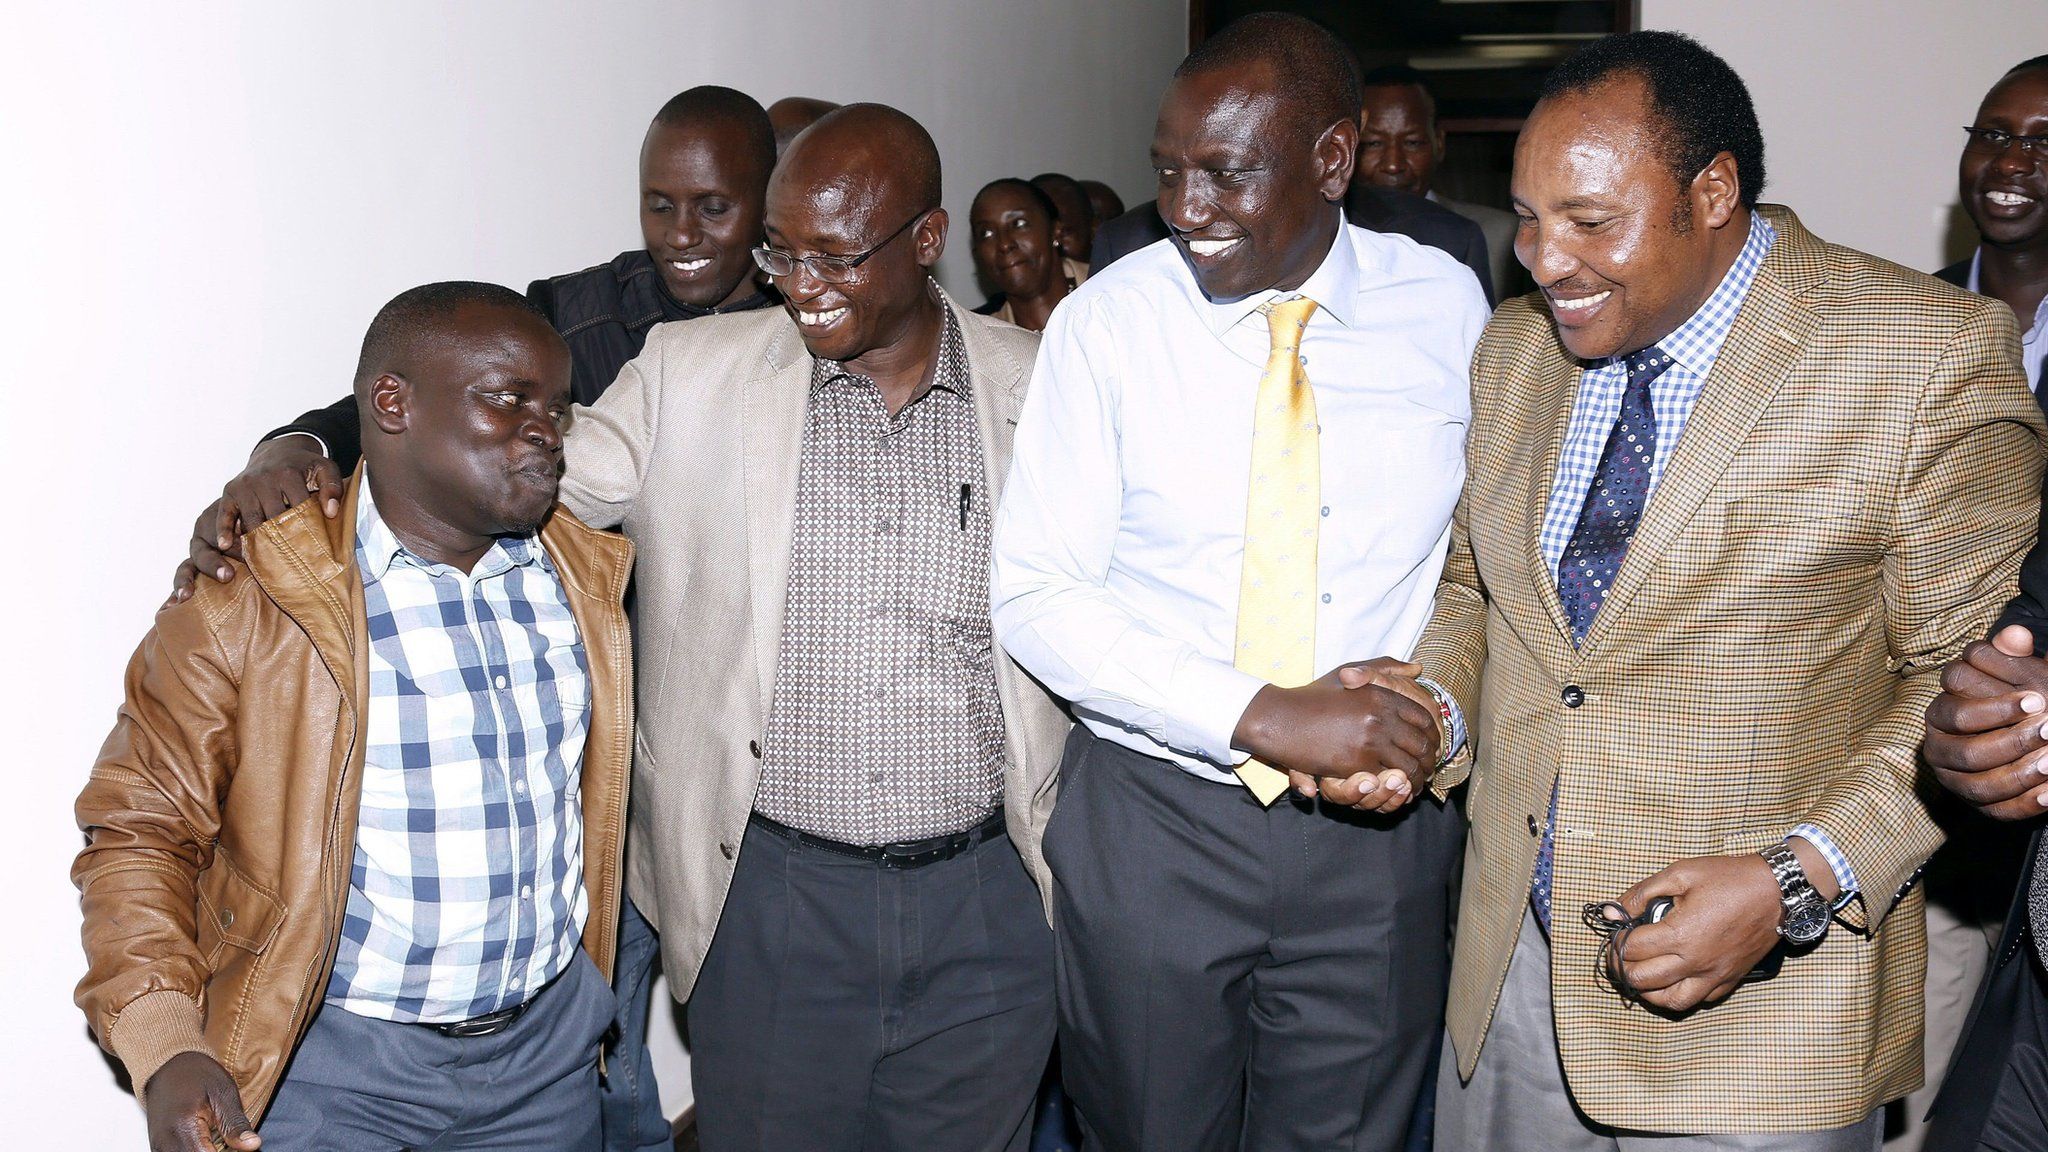 A handout picture taken and released on 5 April 2016 by the Deputy President's Office shows Kenya's Deputy President William Ruto (2nd R) celebrating in Nairobi with Joshua arup Sang (L) shortly after charges of crimes against humanity against them were dropped by the ICC